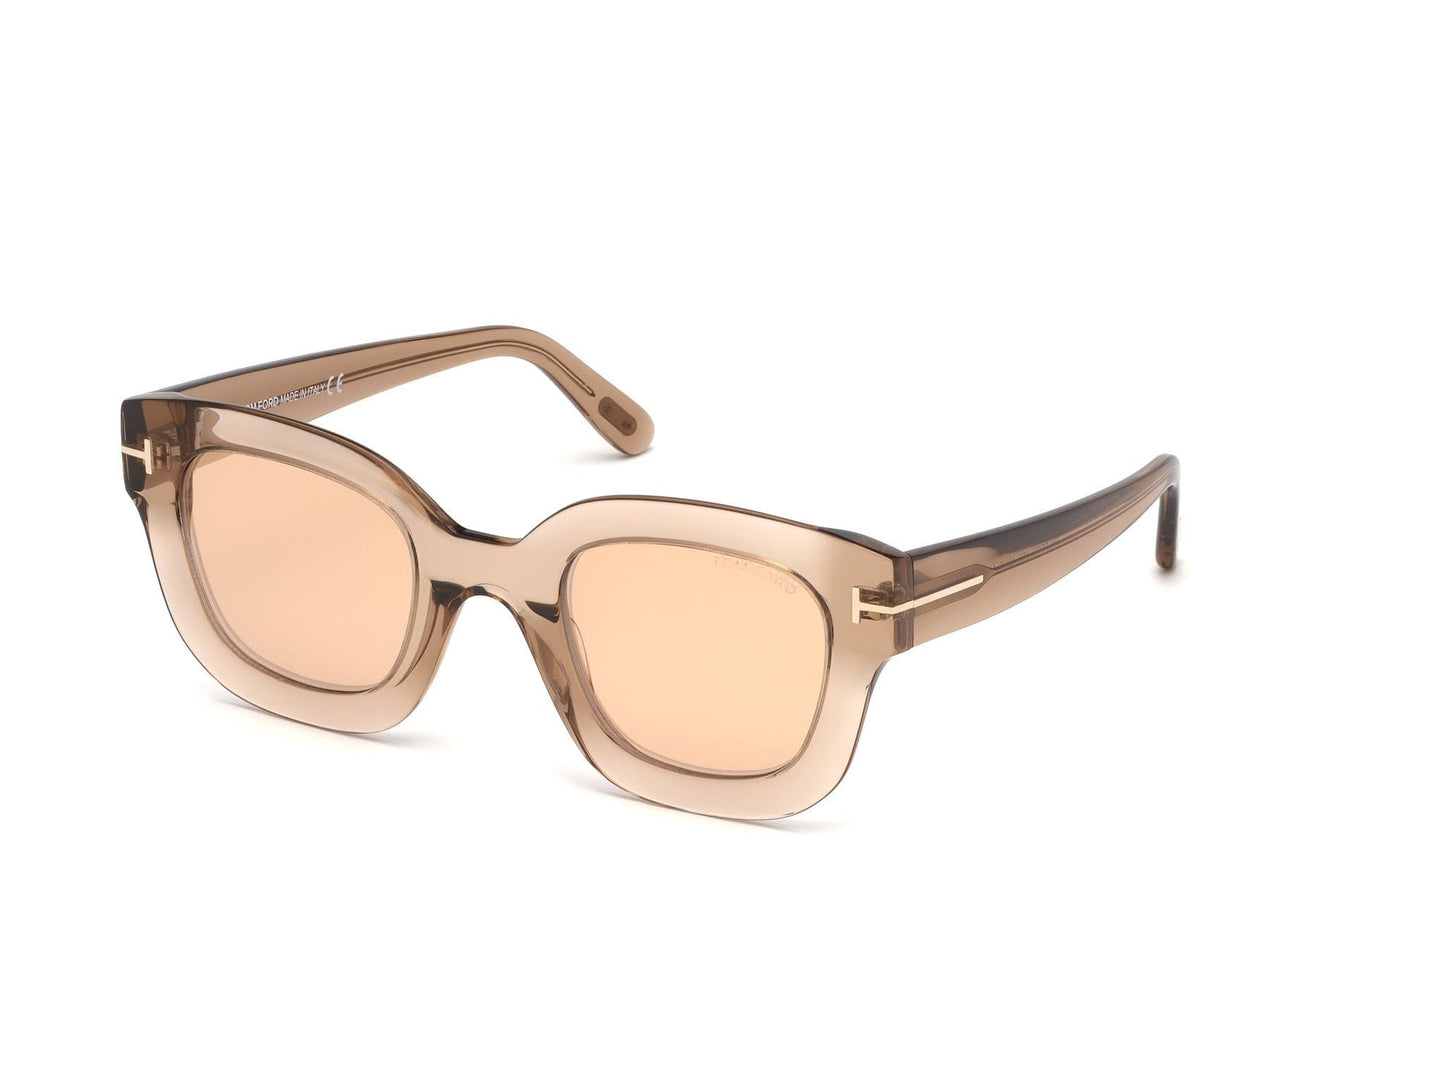 Tom Ford FT0659 Pia Geometric Sunglasses 45G-45G - Shiny Transparent Rose Champagne/ Pink Mirrored Lenses